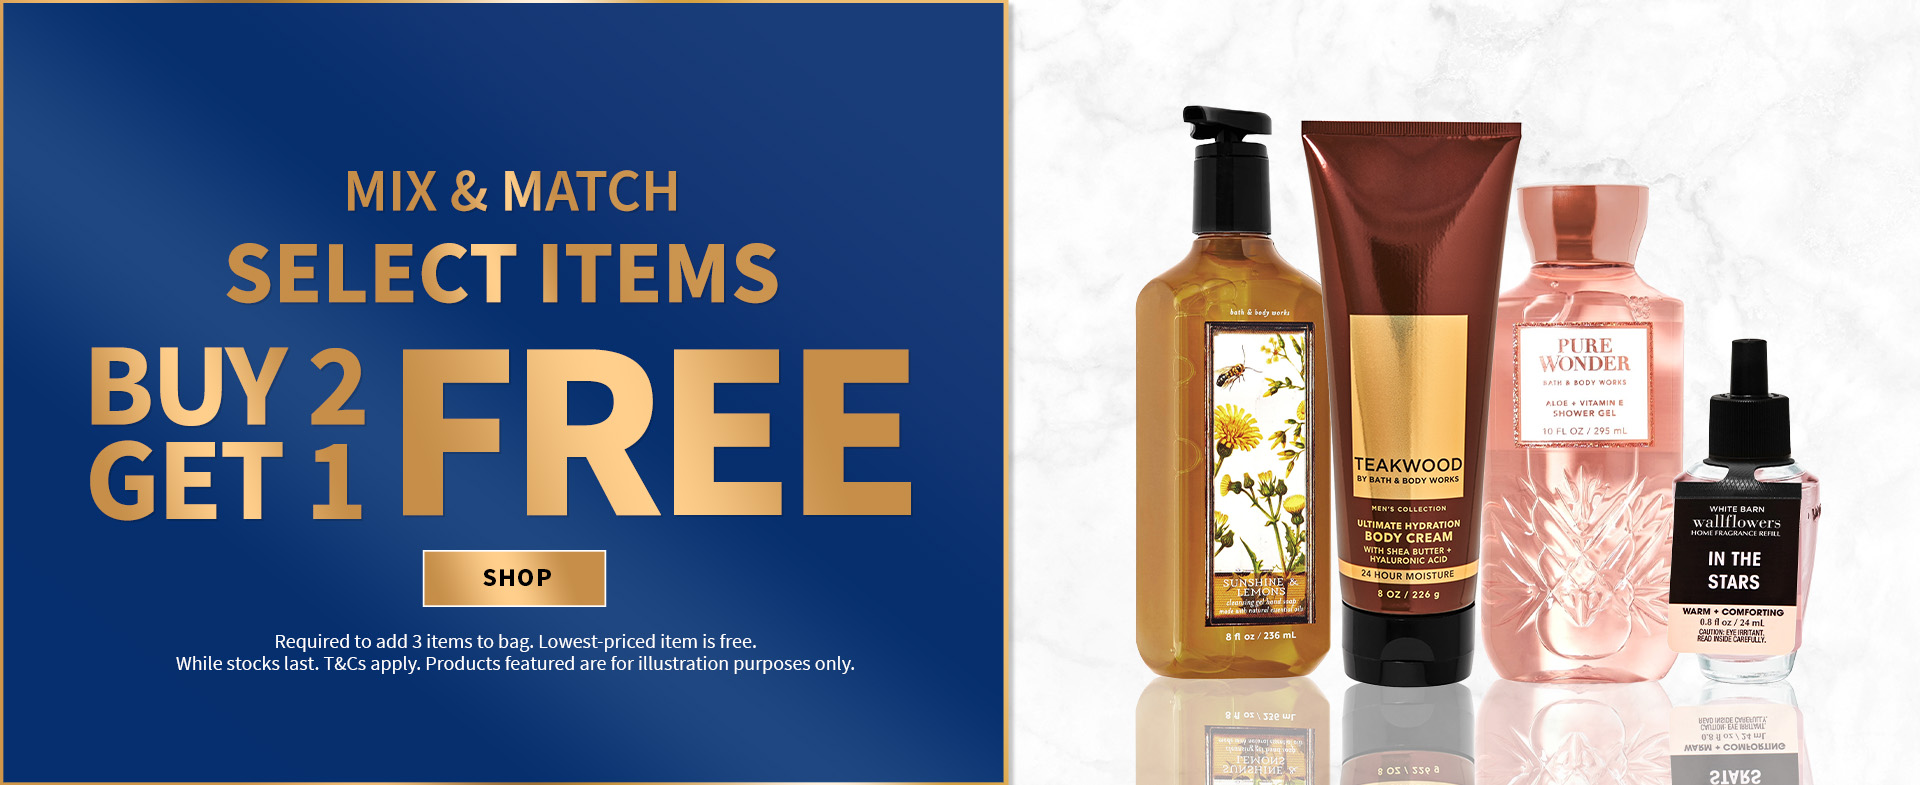 Mix And Match Sitewide Buy 2 Get 1 Free